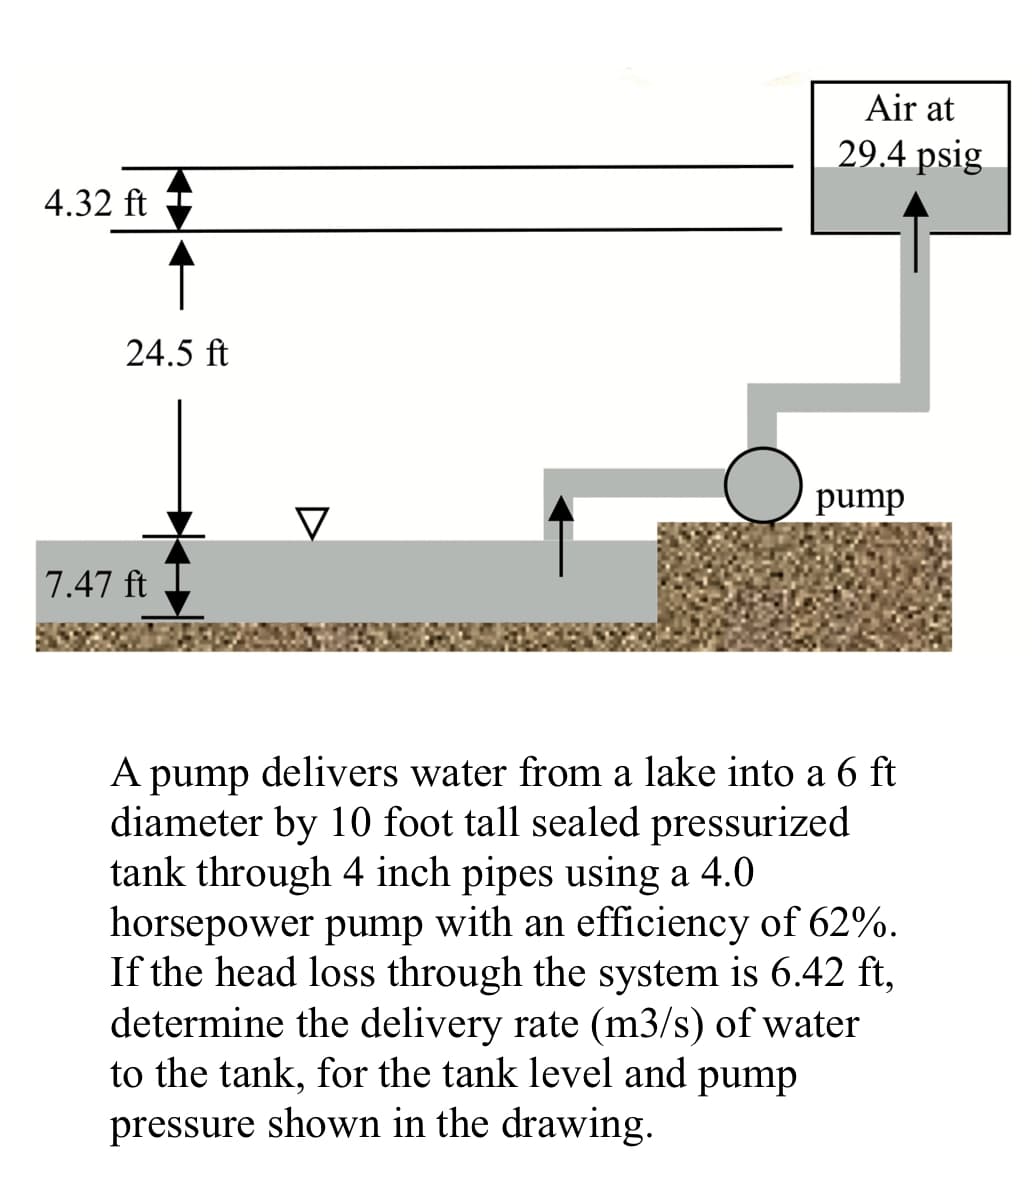 4.32 ft
24.5 ft
7.47 ft
O
Air at
29.4 psig
pump
A pump delivers water from a lake into a 6 ft
diameter by 10 foot tall sealed pressurized
tank through 4 inch pipes using a 4.0
horsepower pump with an efficiency of 62%.
If the head loss through the system is 6.42 ft,
determine the delivery rate (m3/s) of water
to the tank, for the tank level and pump
pressure shown in the drawing.